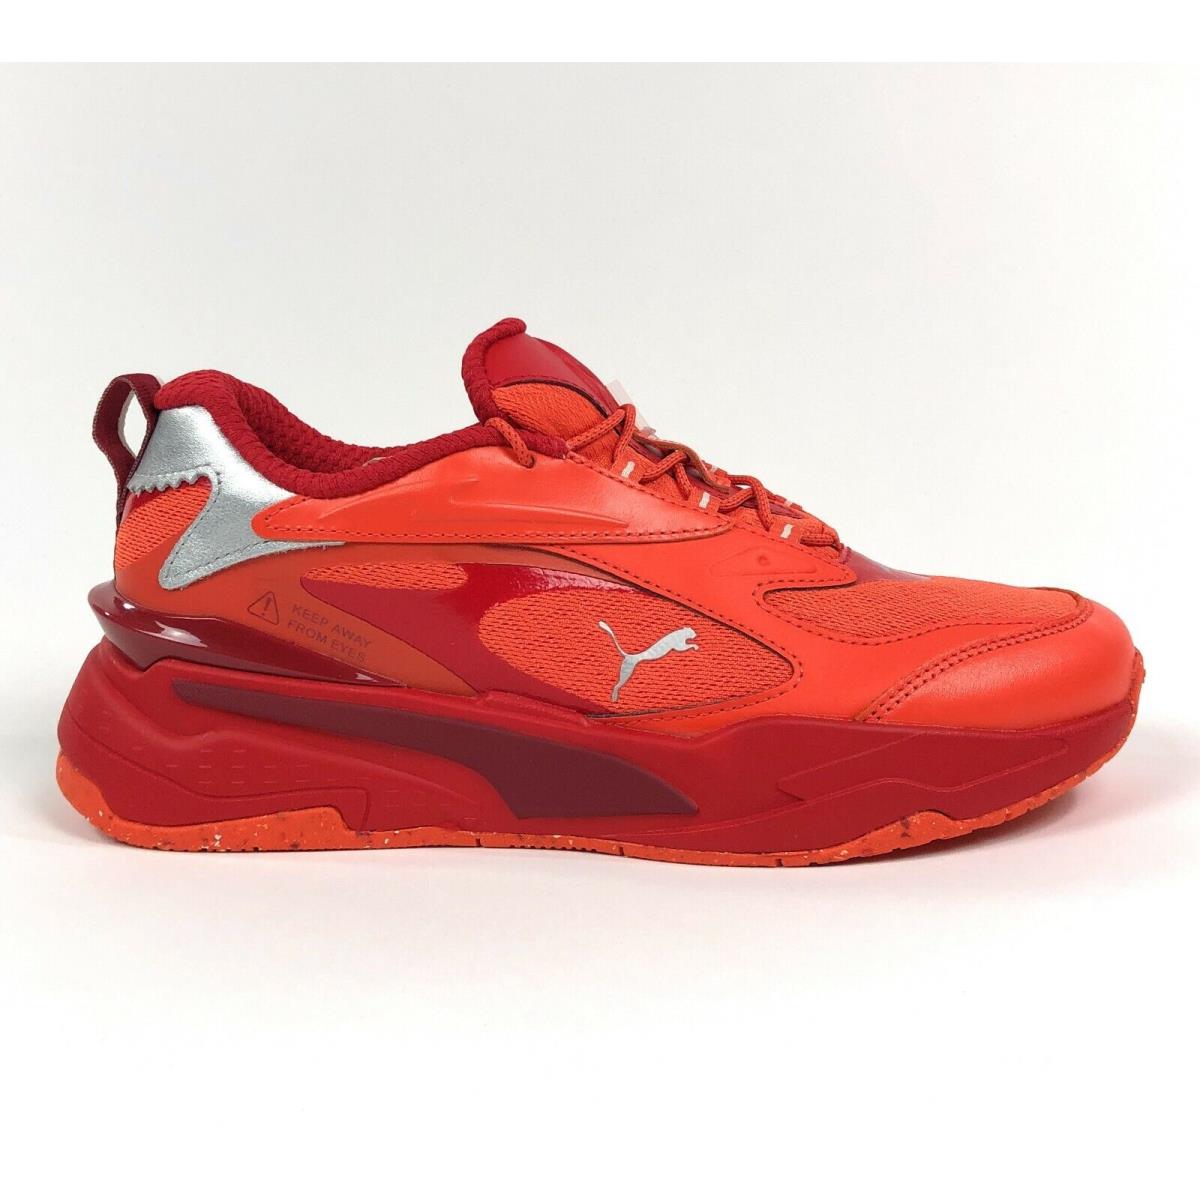 Puma Rs-fast Caliente Taqueria Shoes Sneakers Mens 8.5 Low Orange Red 381505-01